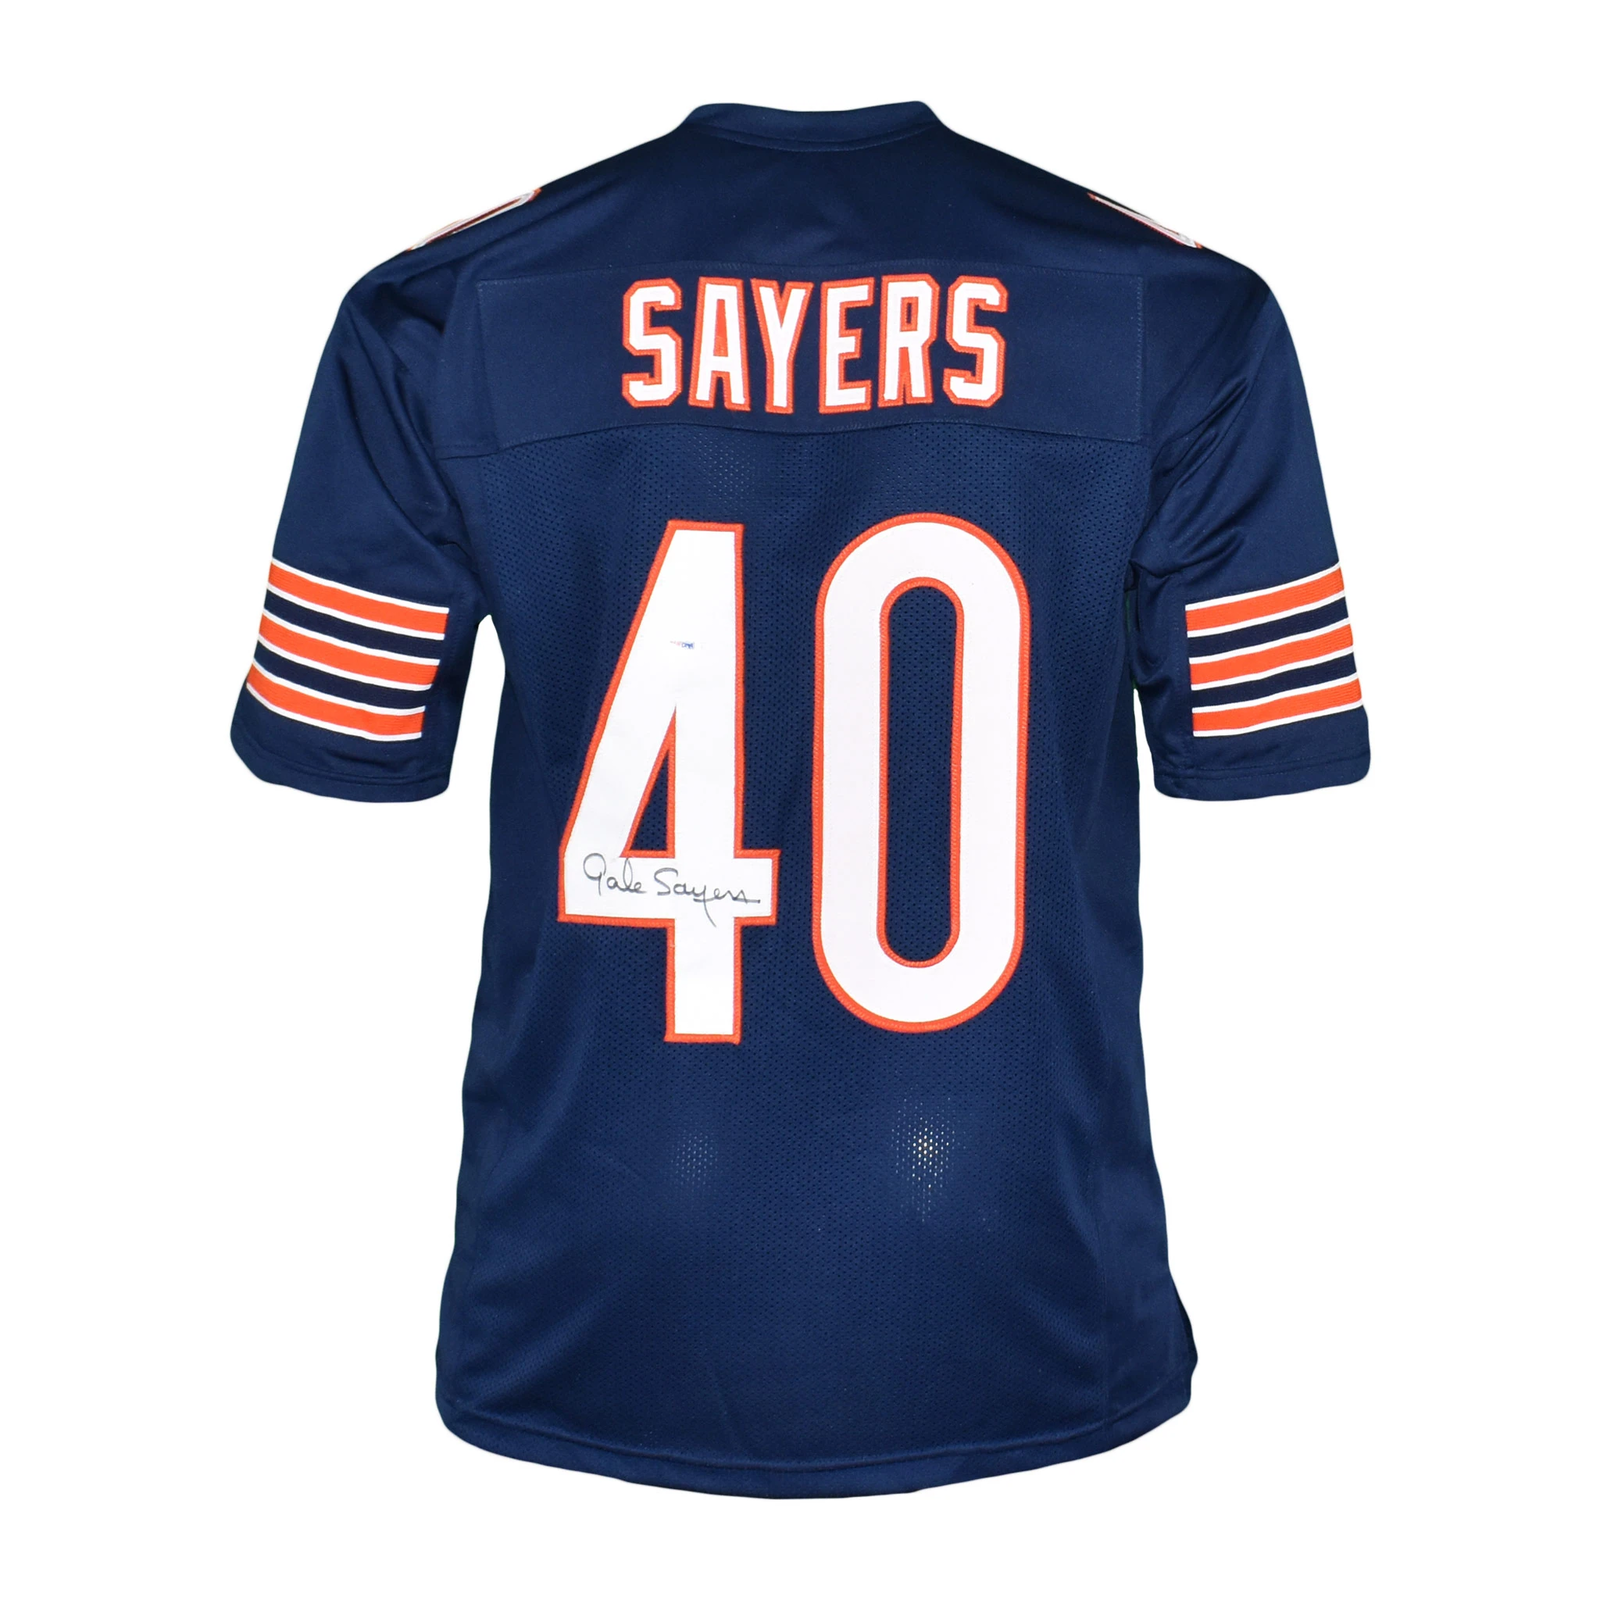 Gale Sayers Signed Pro Edition Blue Football Jersey (PSA)